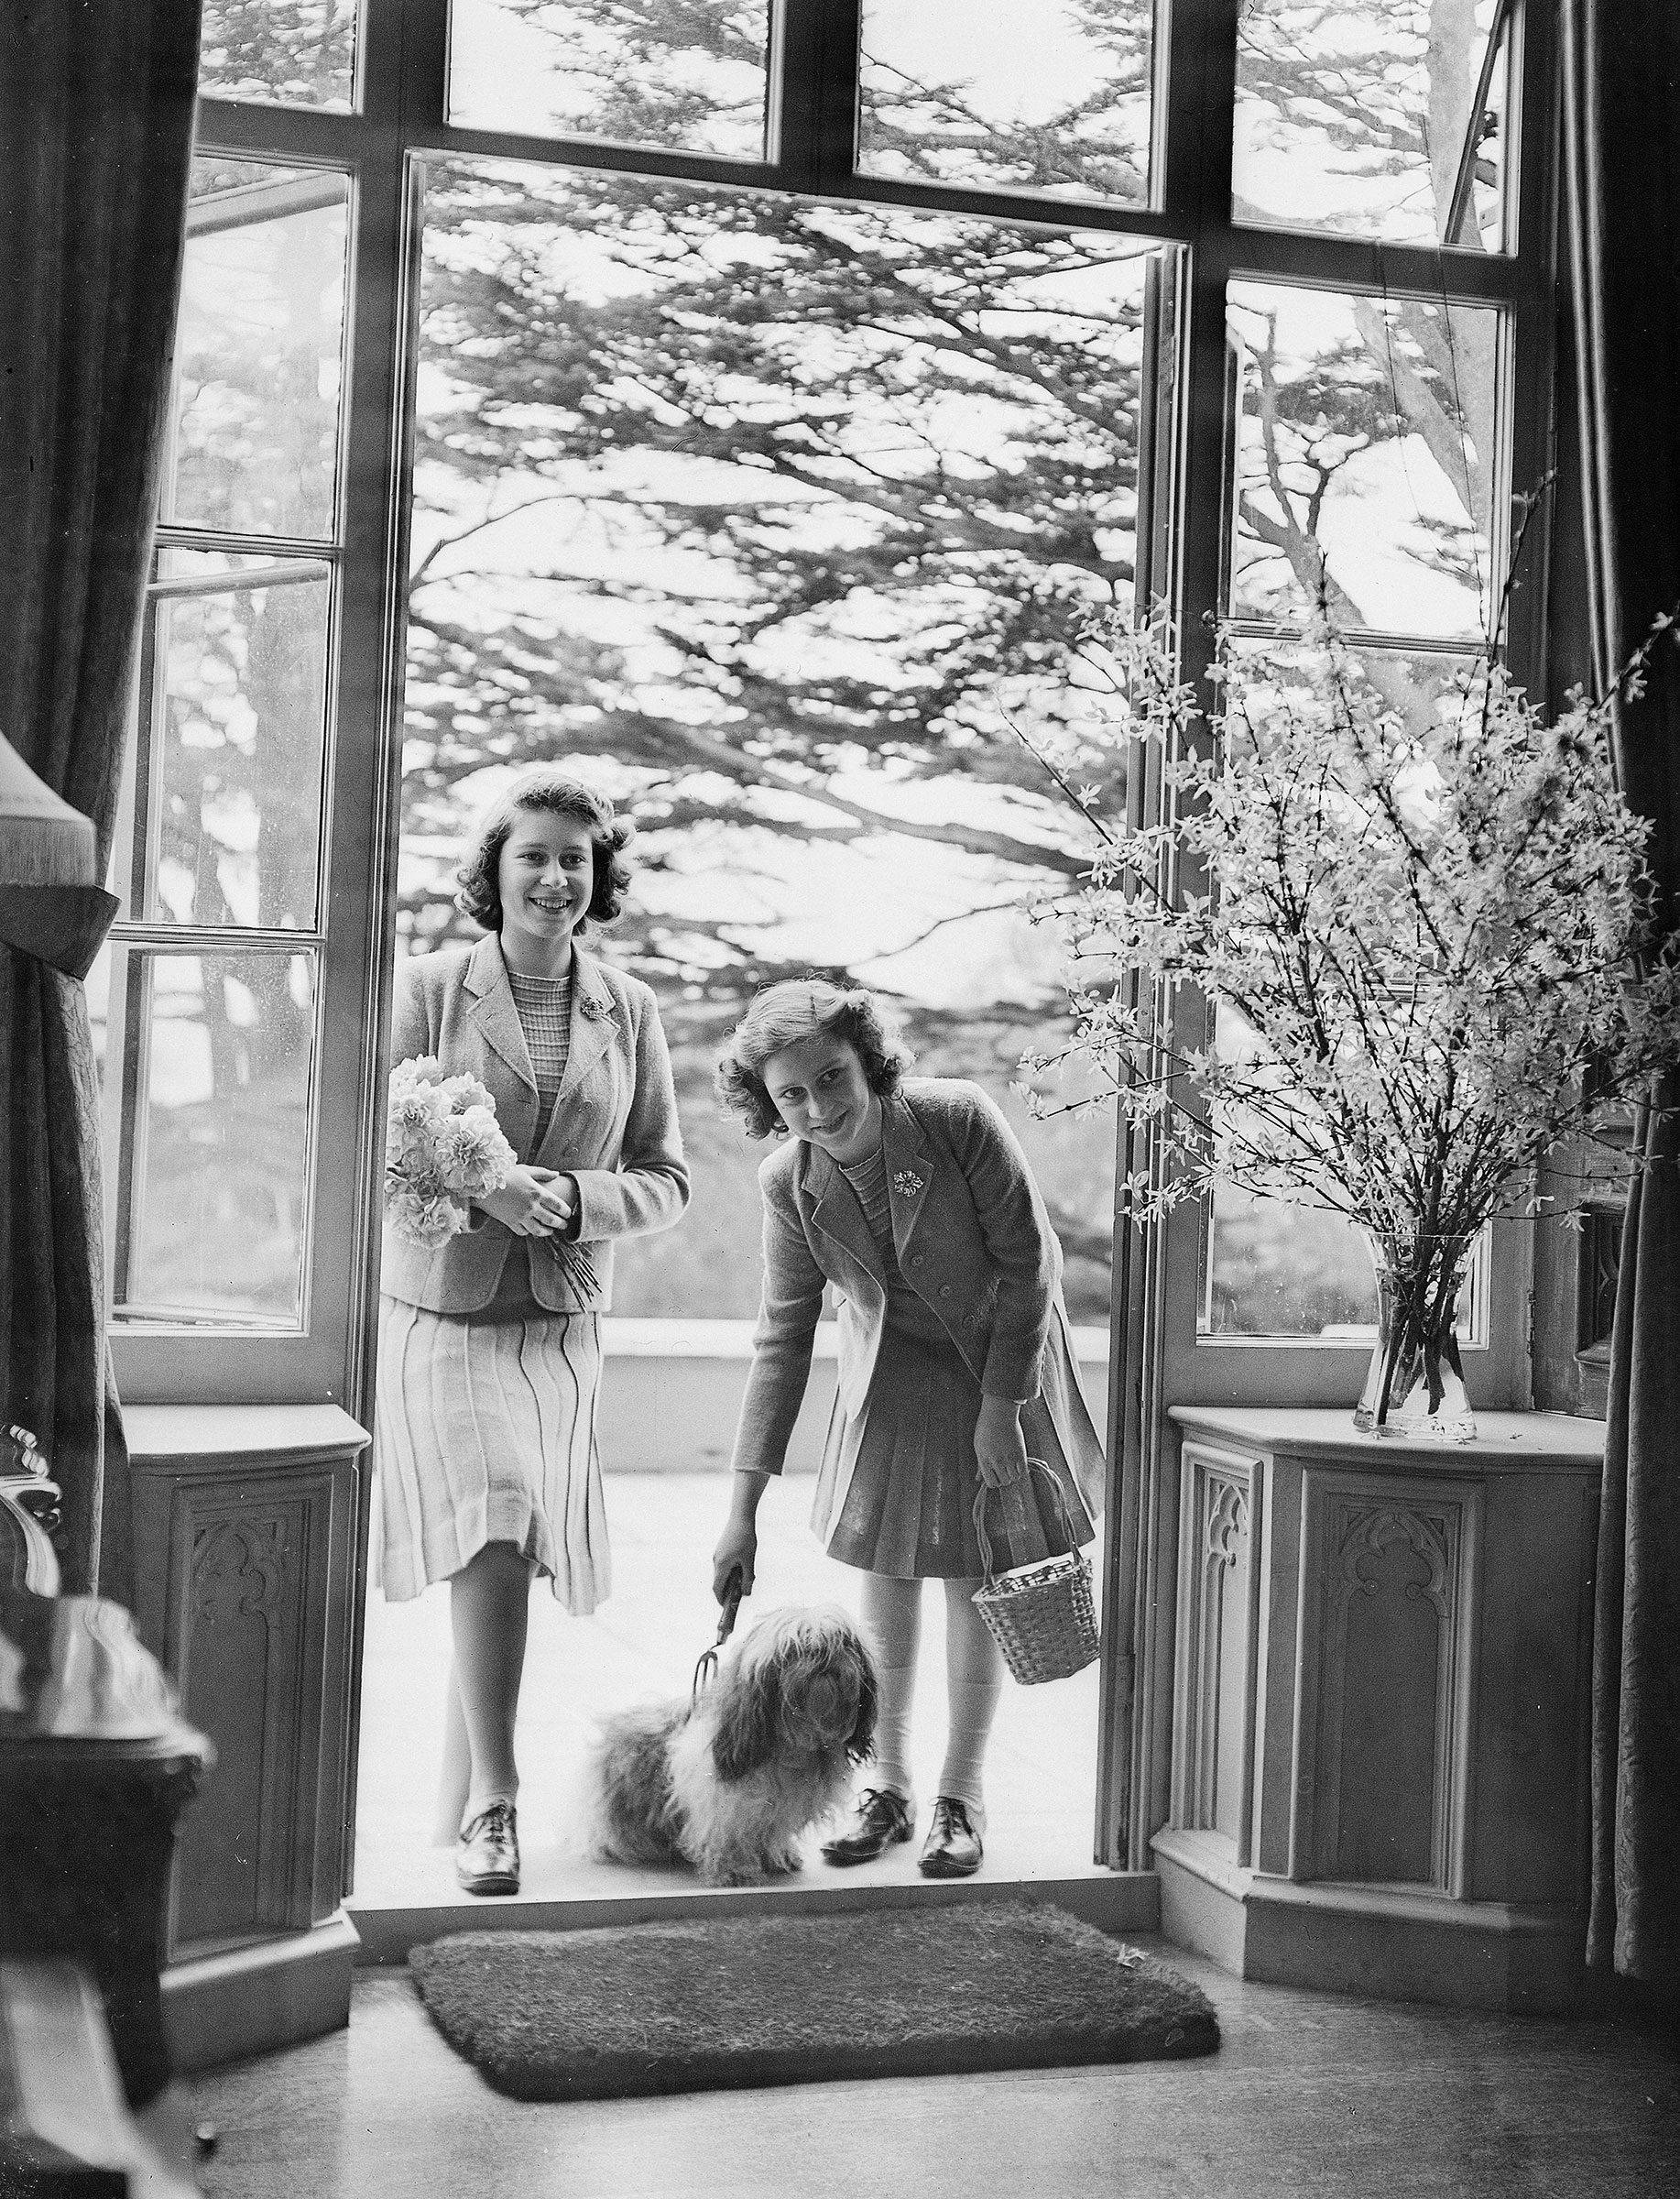 Princess Elizabeth and Princess Margaret stand in a doorway with a pet dog at the Royal Lodge in Windsor Castle, England on April 11, 1942. (Studio Lisa/Getty Images)